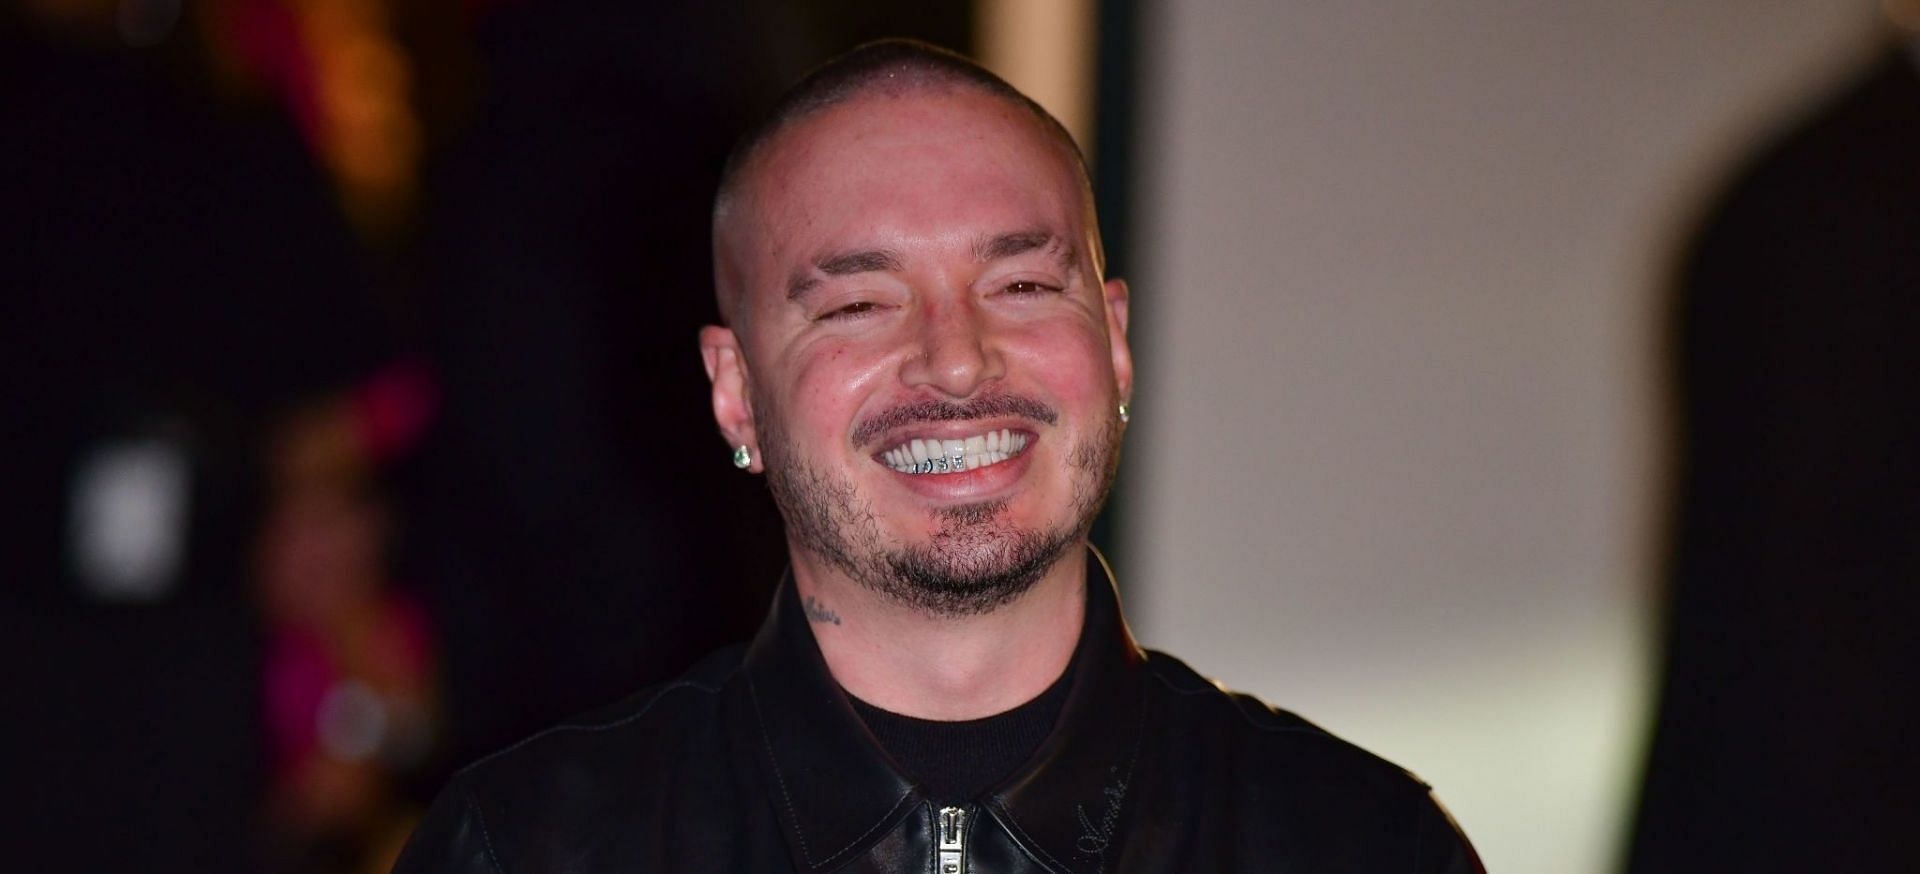 J Balvin faces criticism for receiving &#039;Afro Latino Artist of the Year&#039; Award at AEAUSA (Image via James Devaney/Getty Images)